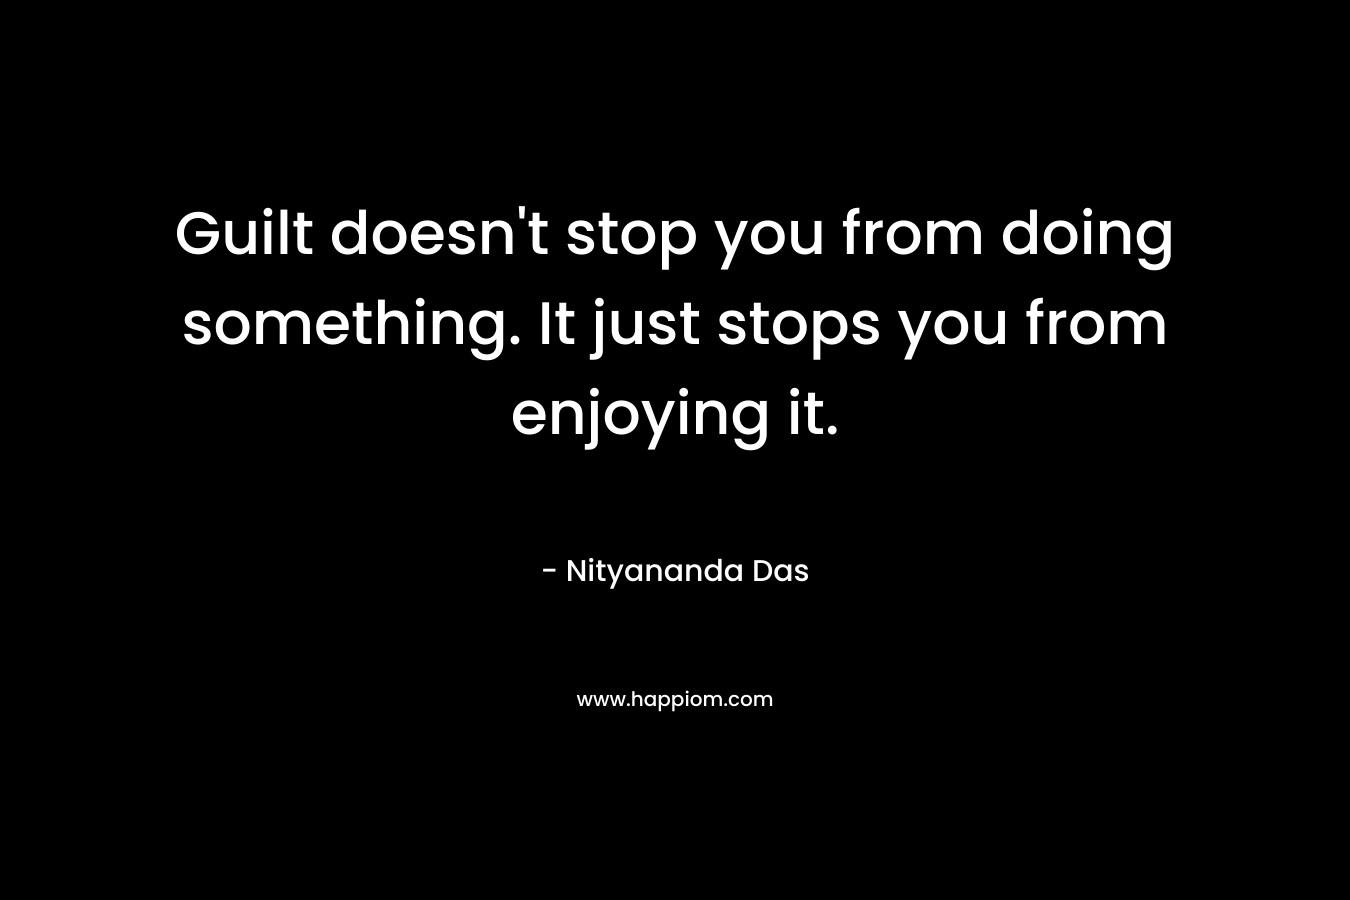 Guilt doesn’t stop you from doing something. It just stops you from enjoying it. – Nityananda Das